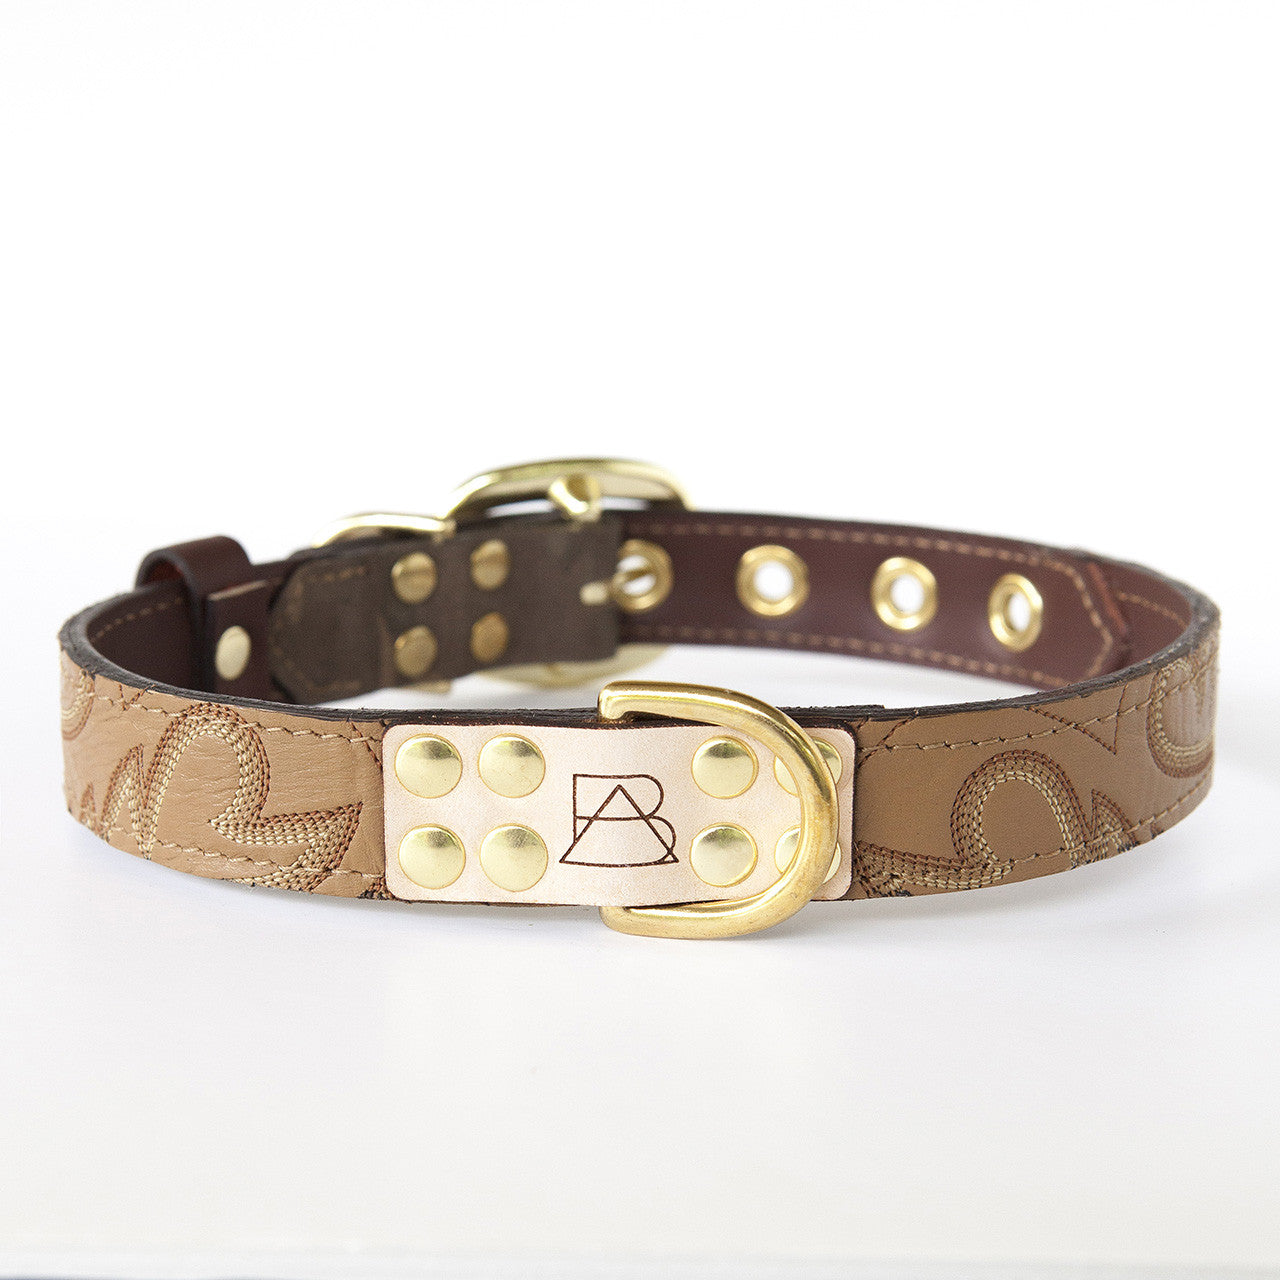 Camo Dog Collar with Tan Leather + Brown and White Stitching